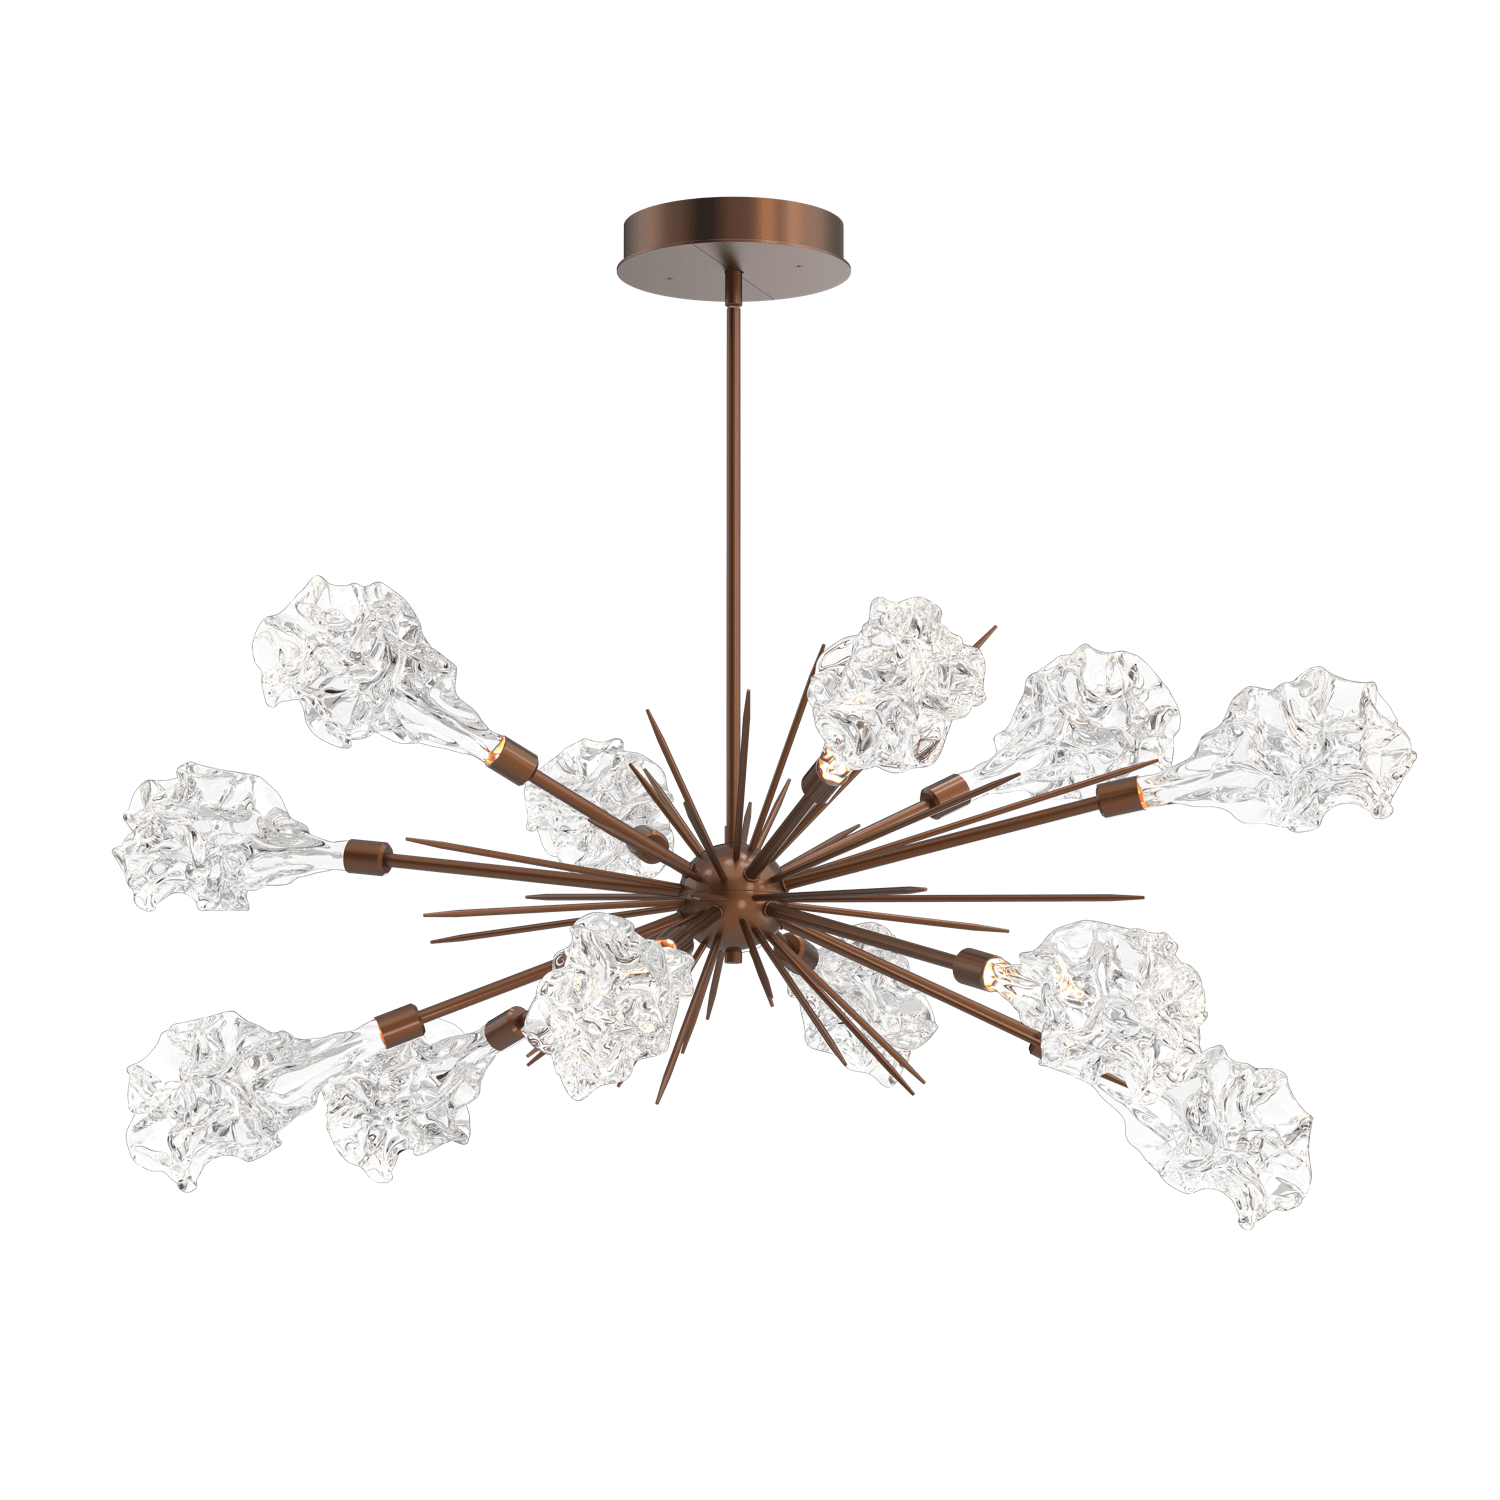 PLB0059-0A-BB-Hammerton-Studio-Blossom-47-inch-oval-starburst-chandelier-with-burnished-bronze-finish-and-clear-handblown-crystal-glass-shades-and-LED-lamping